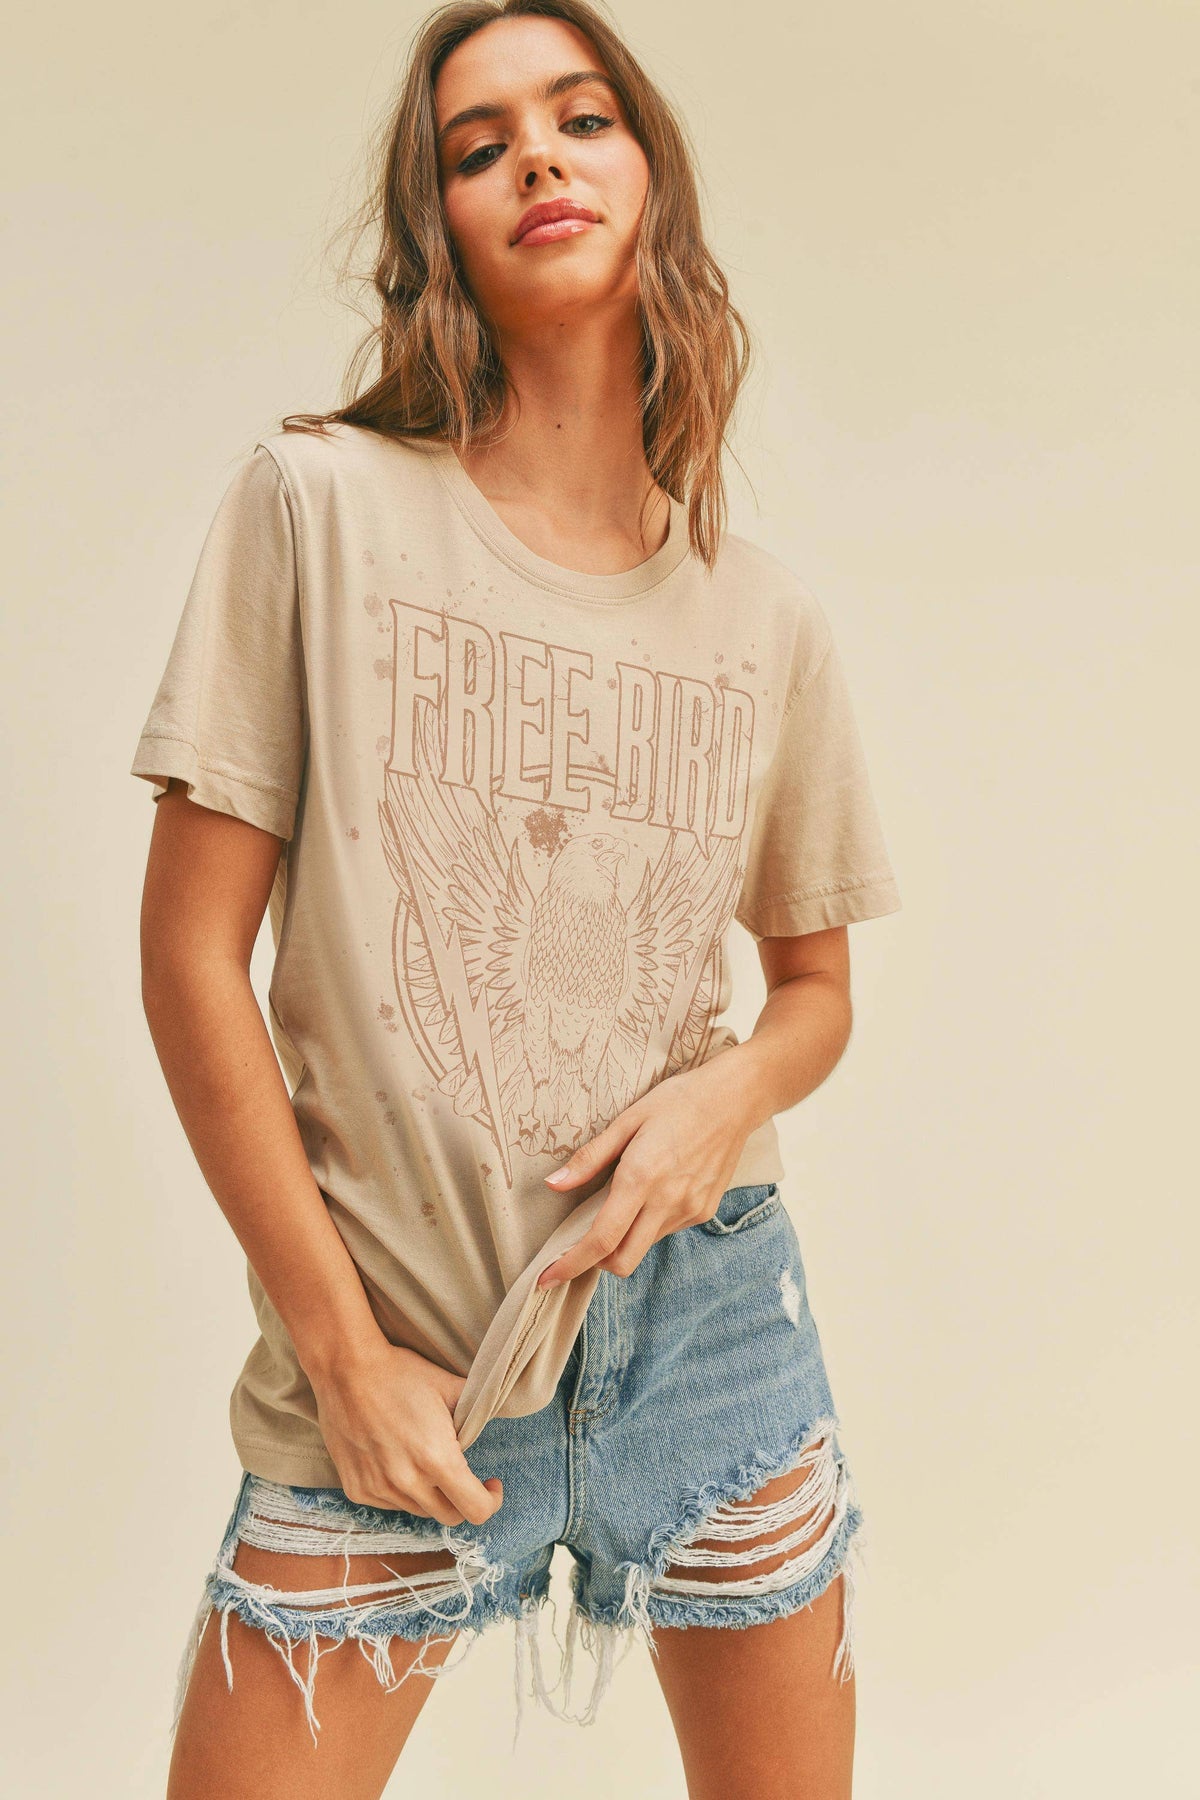 Rock and Roll Free Spirit Graphic Tee: Sand